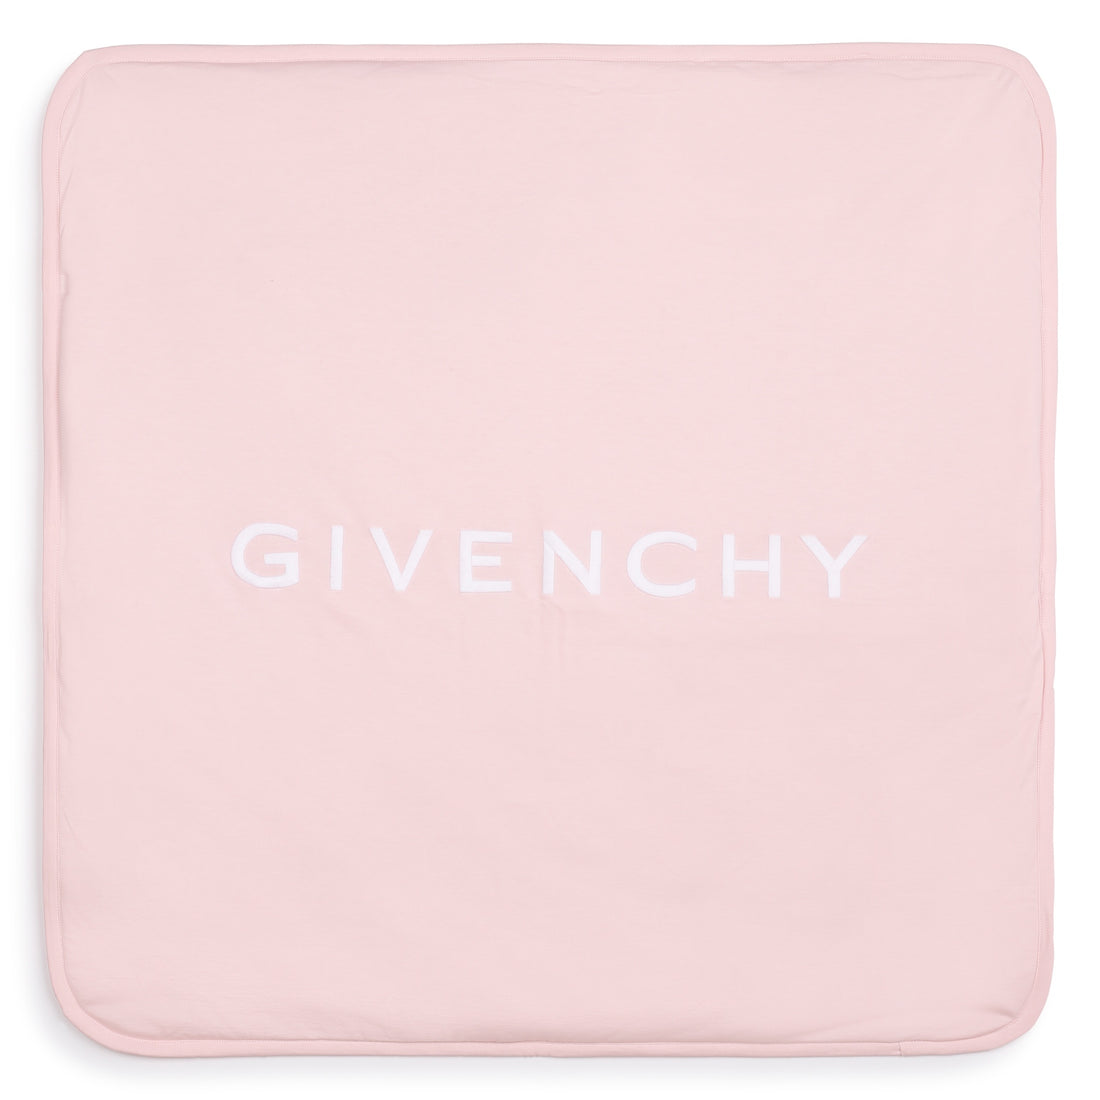 Givenchy Baby Blanket Marshmallow Pink - Soft and Cozy Comfort | Schools Out